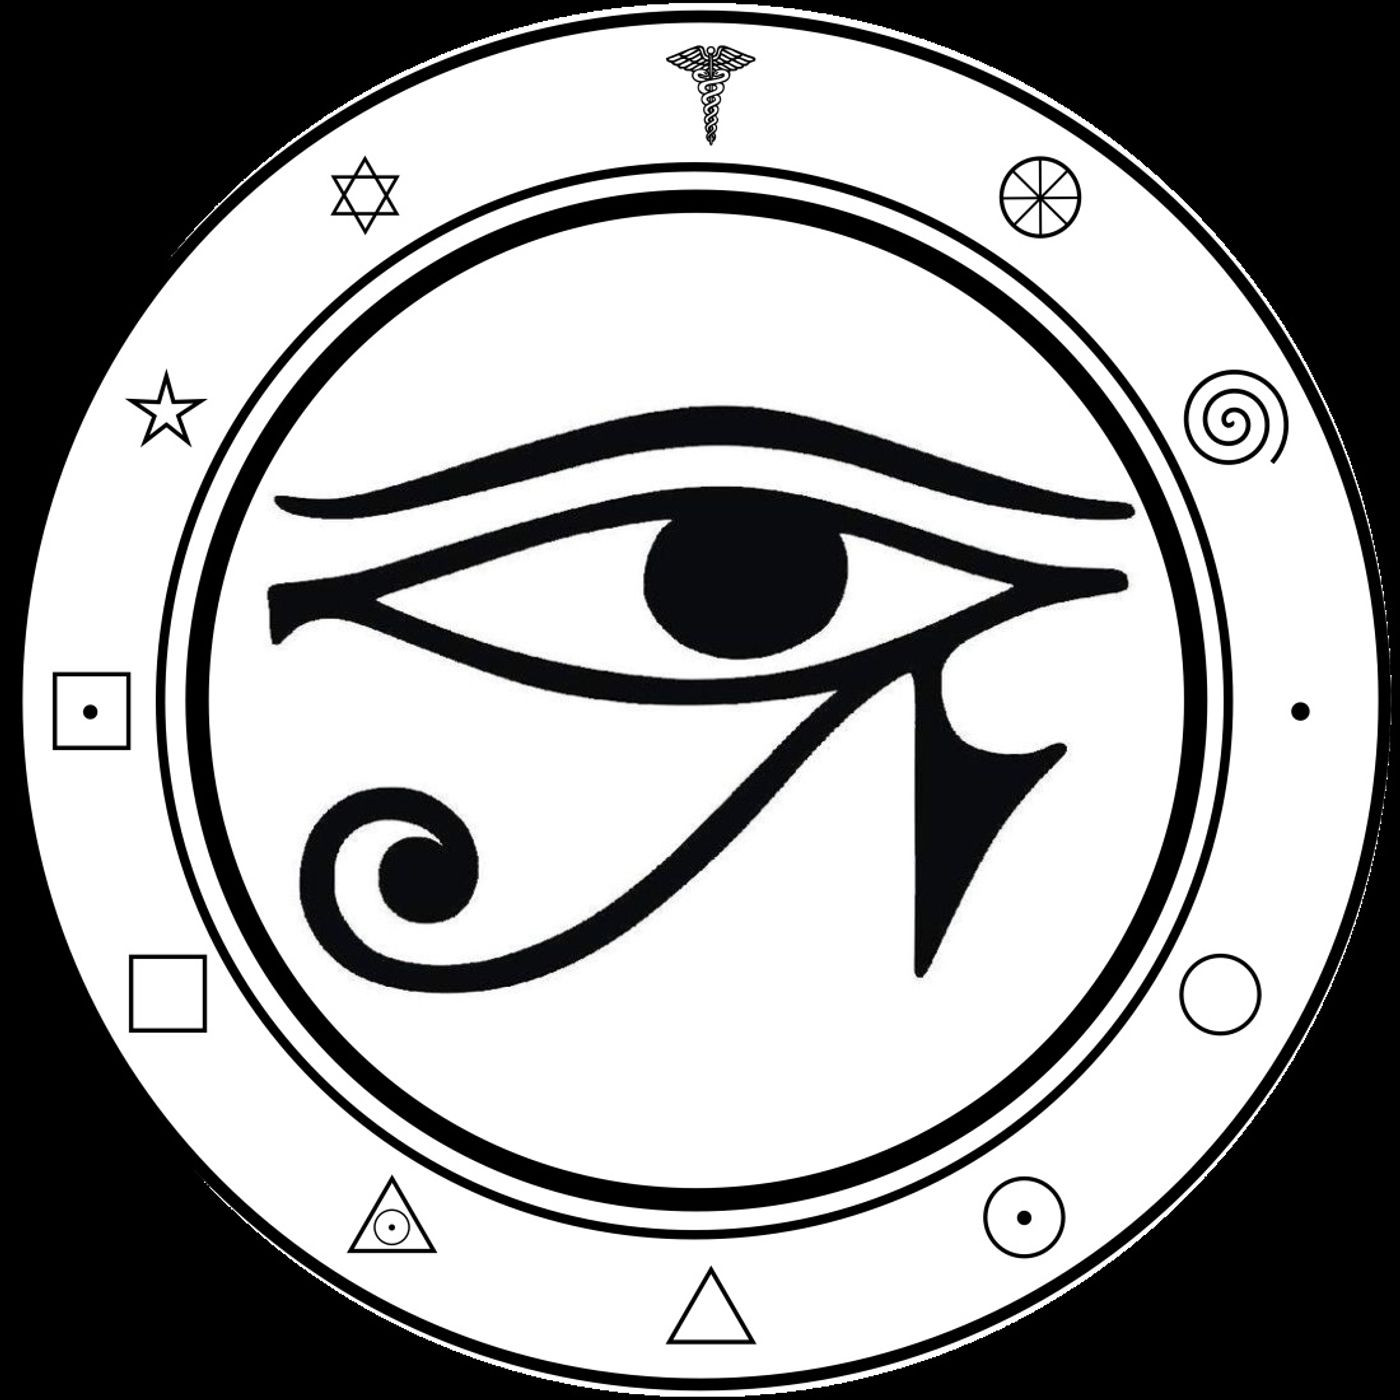 The House of RA announcements